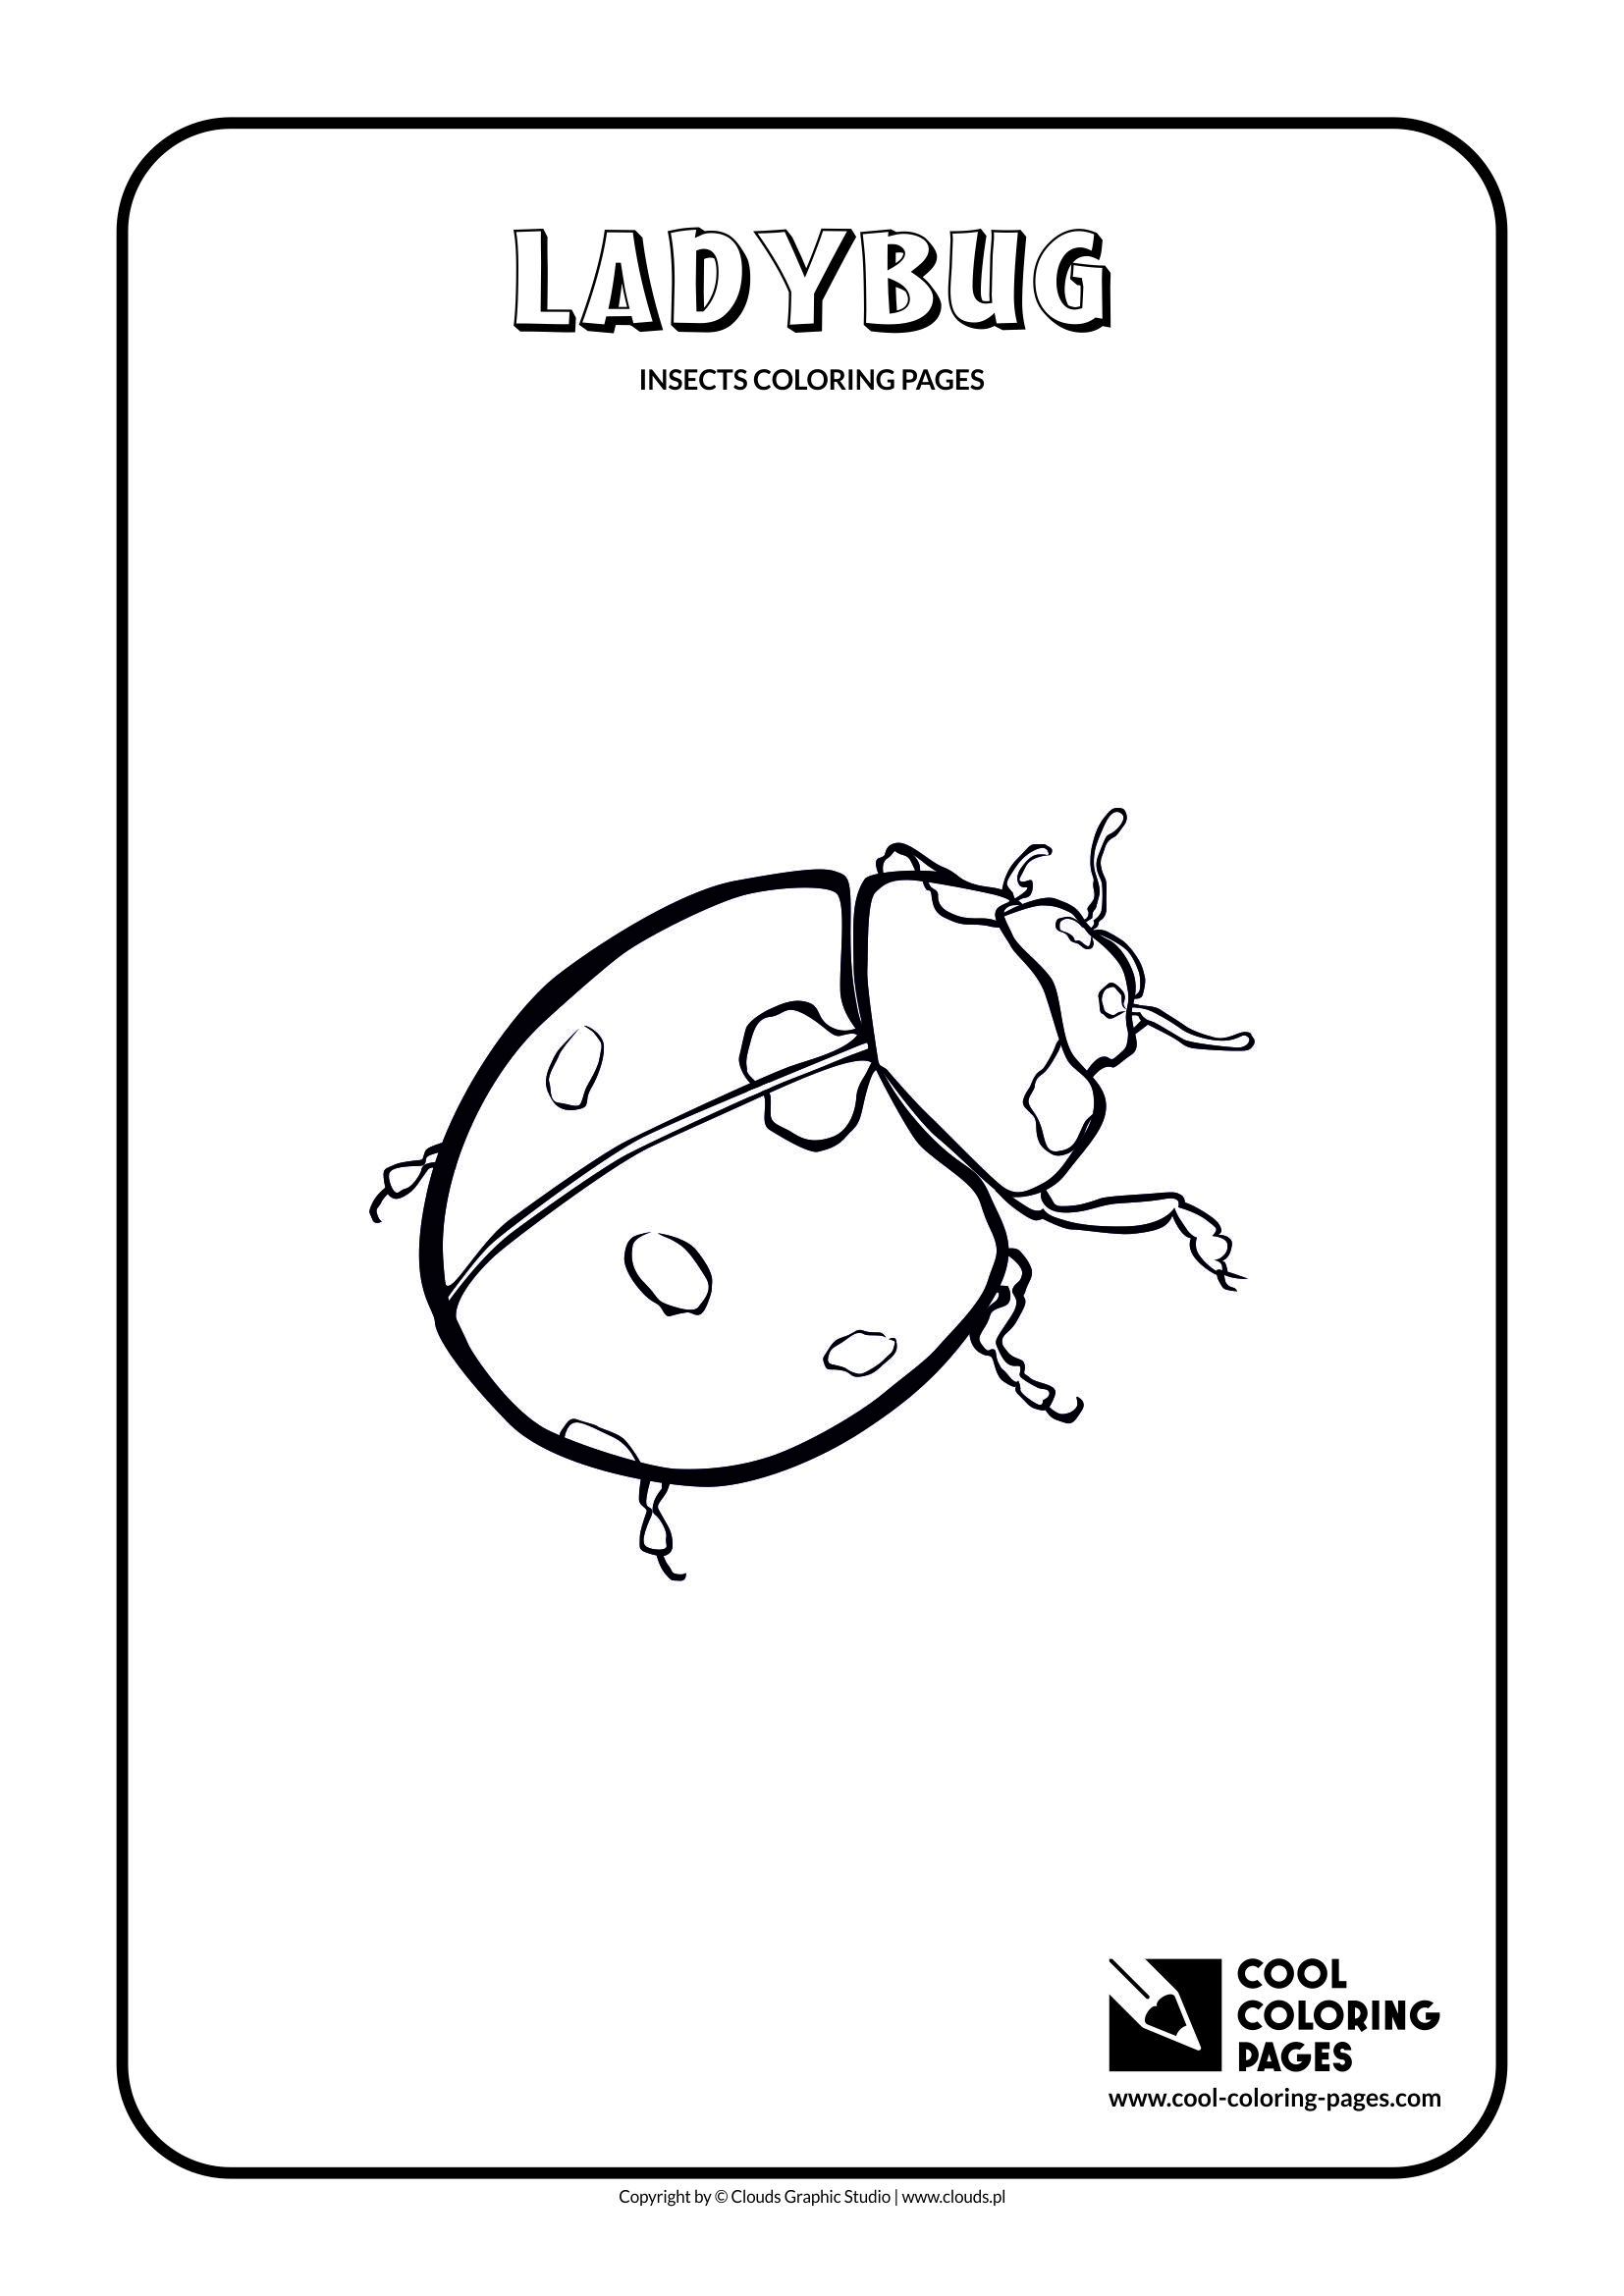 Cool Coloring Pages - Animals / Ladybug / Coloring page with ladybug